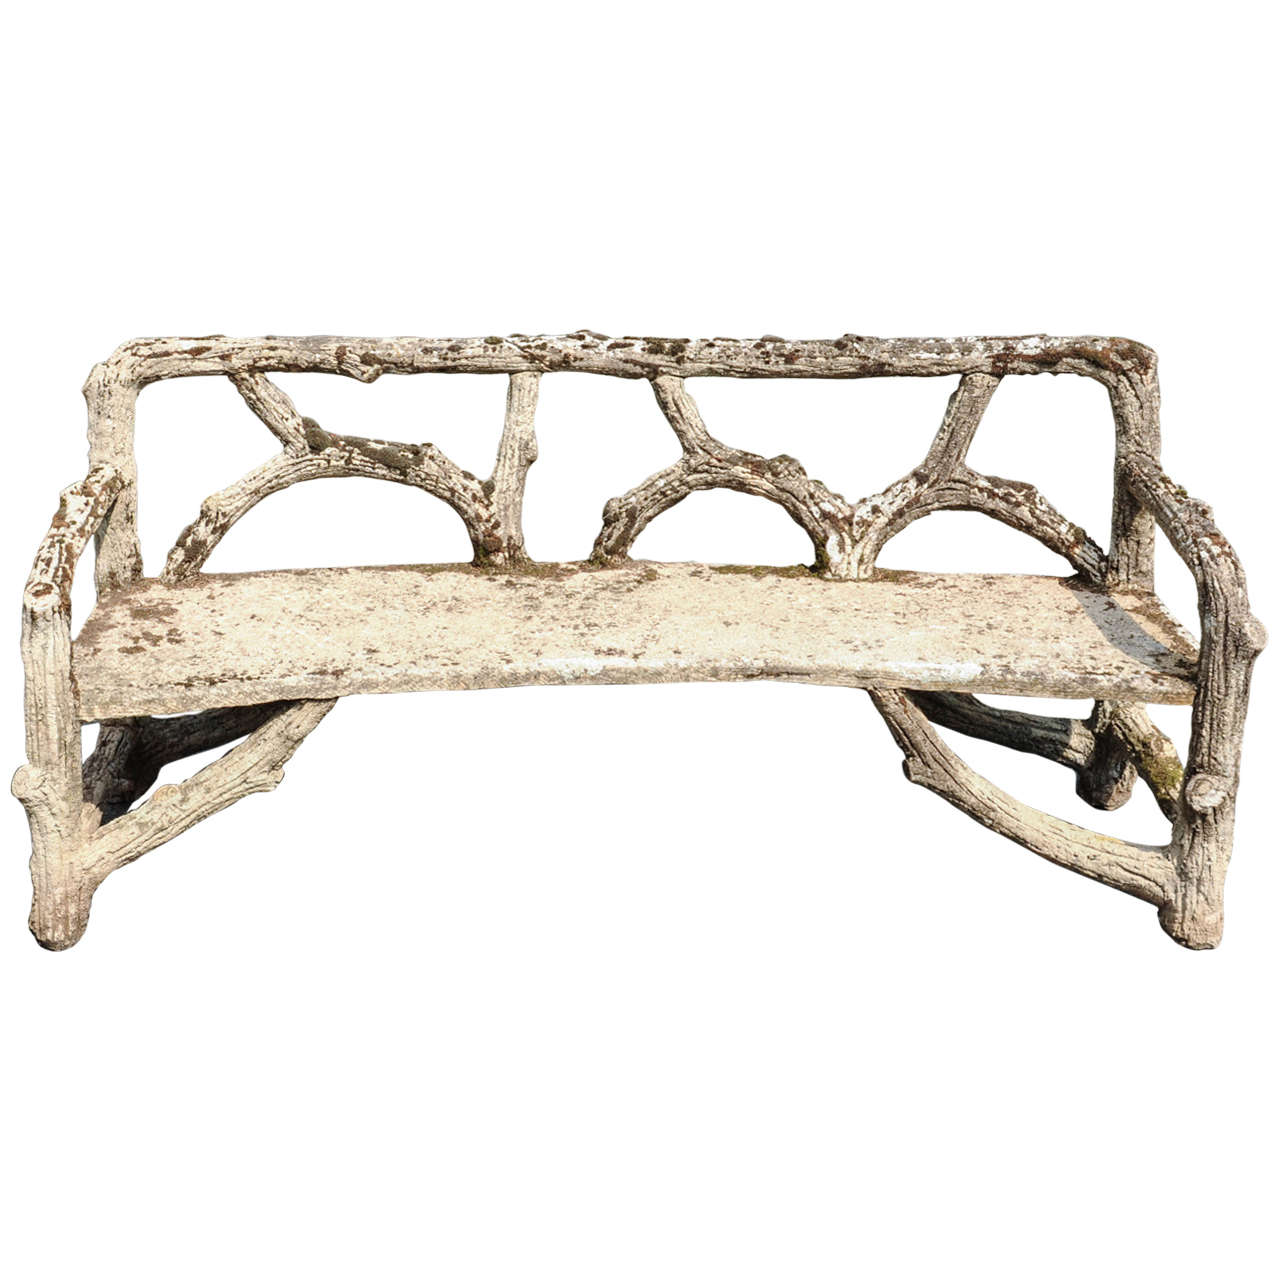 Curved French Faux Bois Cement Garden Bench